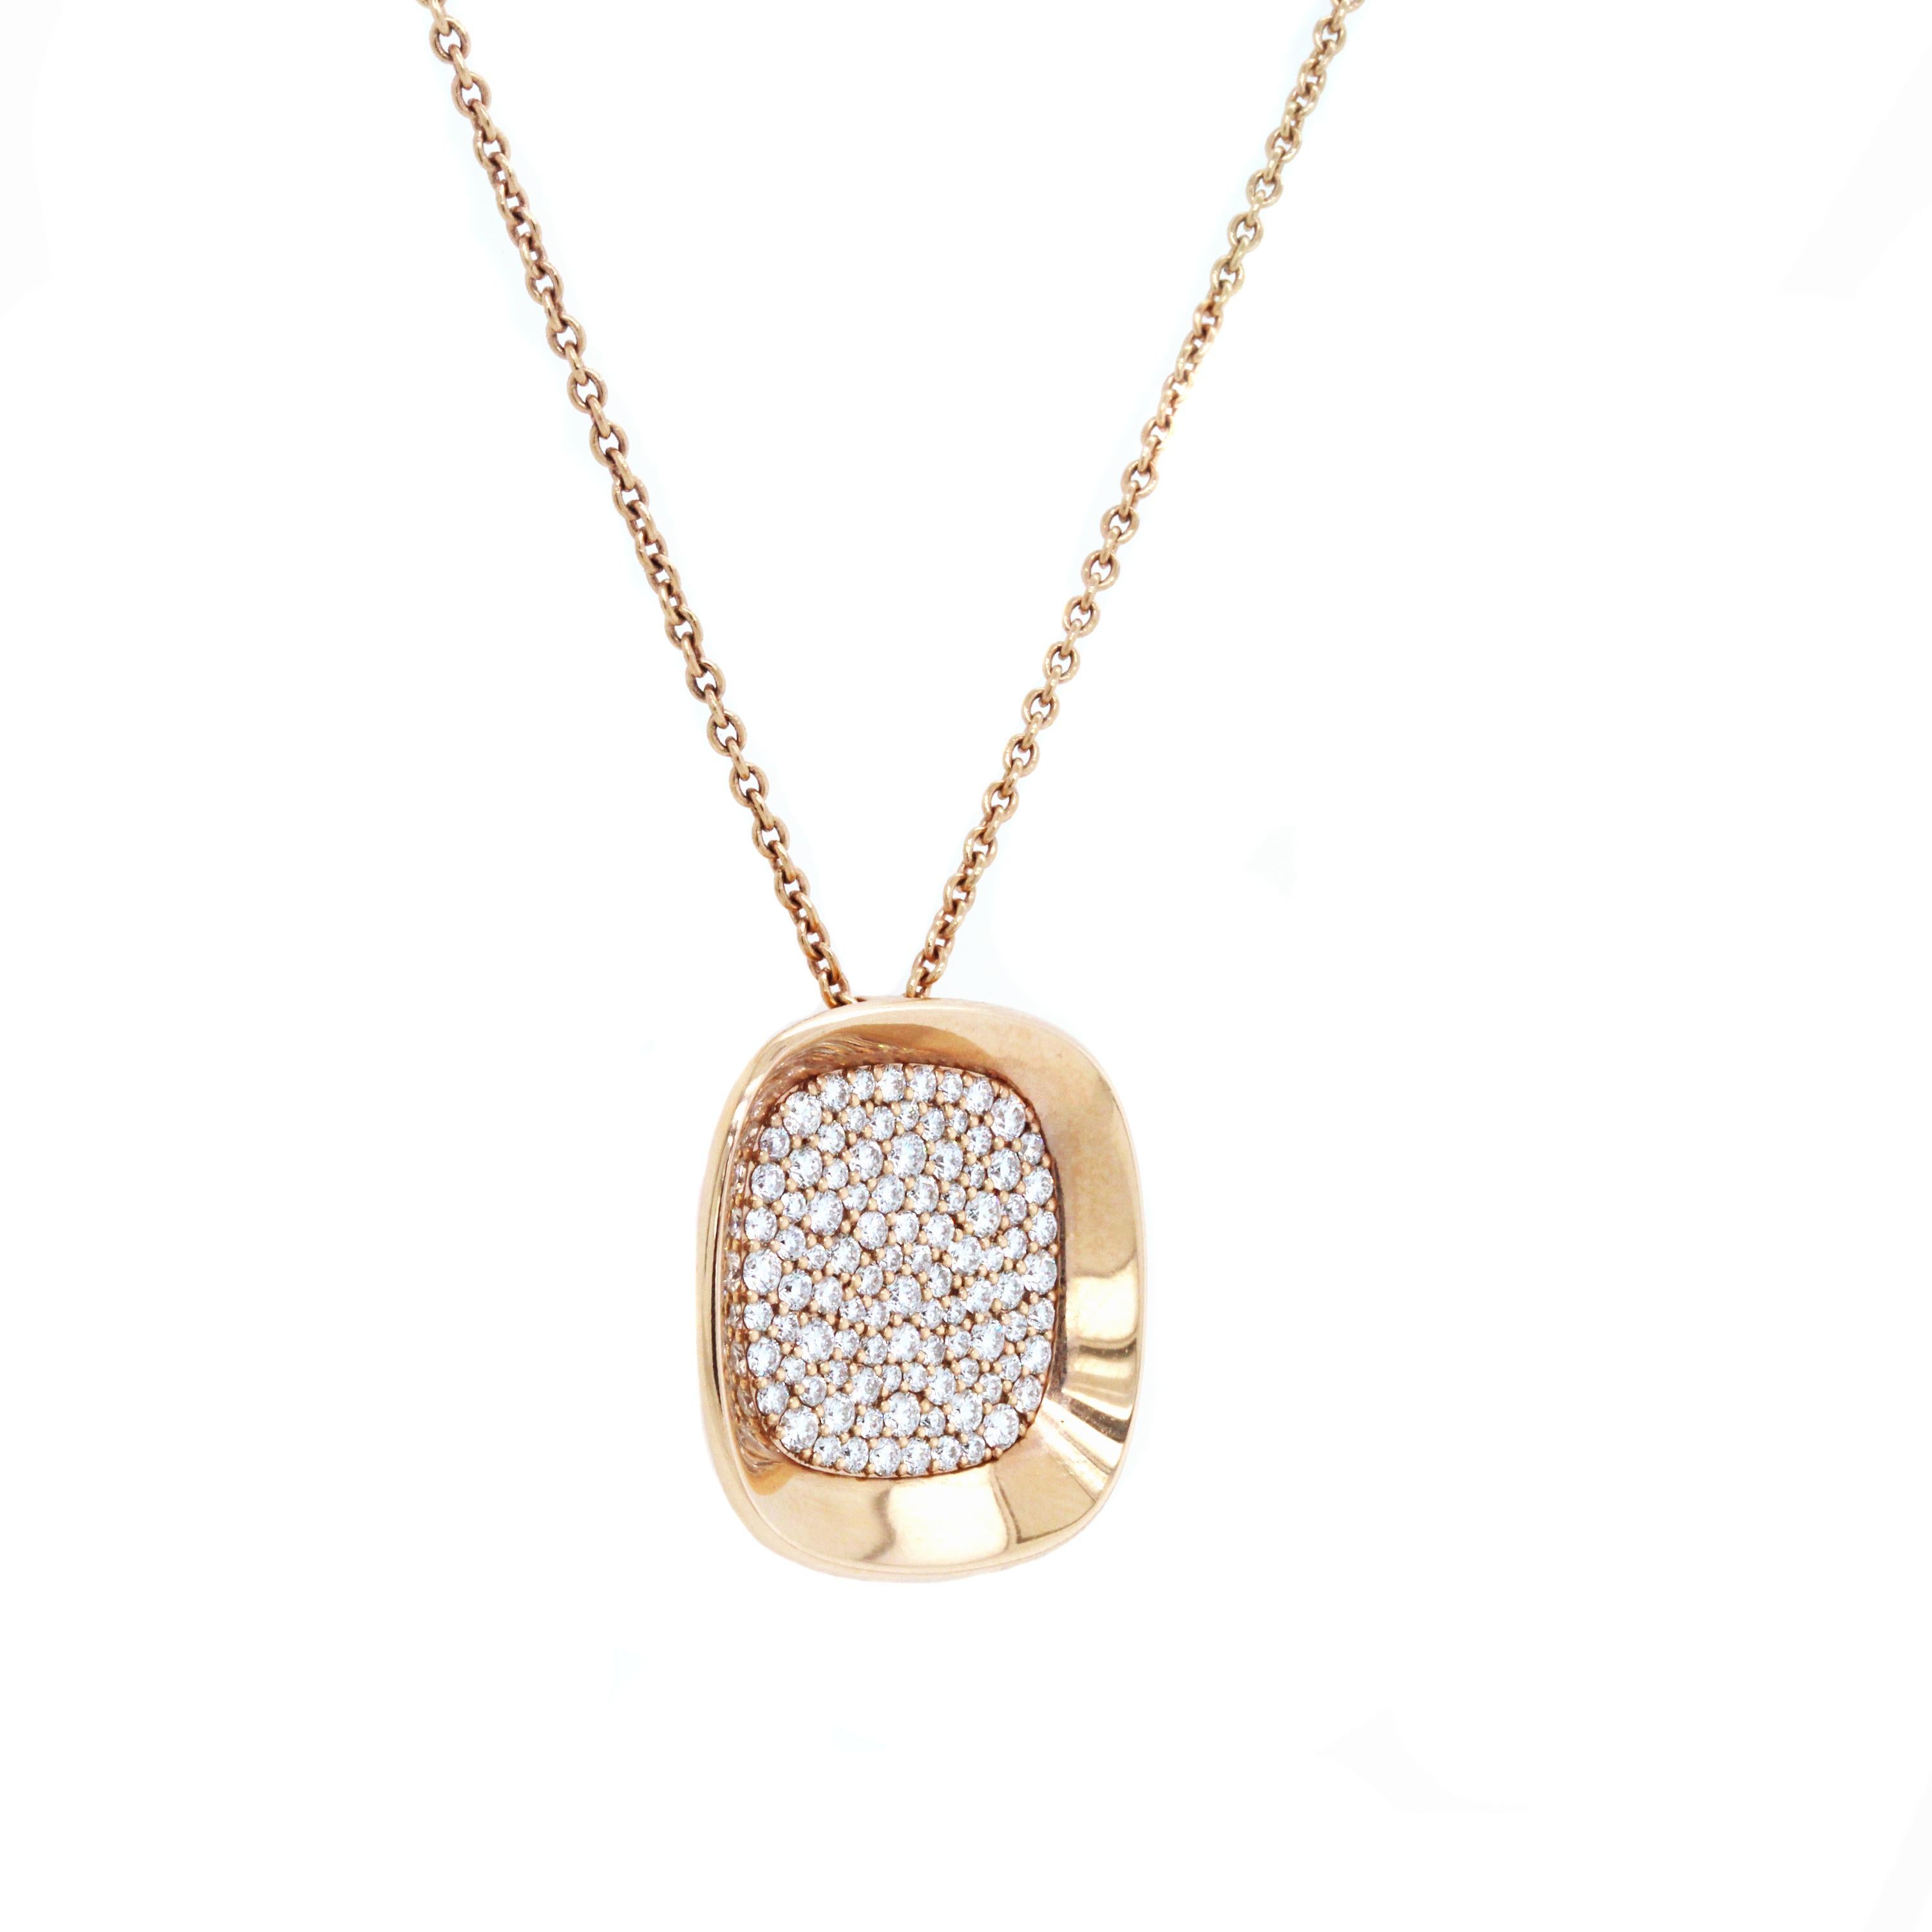 18K Rose Gold and Diamond Carnaby Street Pendant Necklace by Roberto Coin

From the Carnaby Street collection by Roberto Coin

Diamonds are pave set in the center and surrounded by a high-polished rose gold. 
0.88 carat G color, VS clarity diamonds